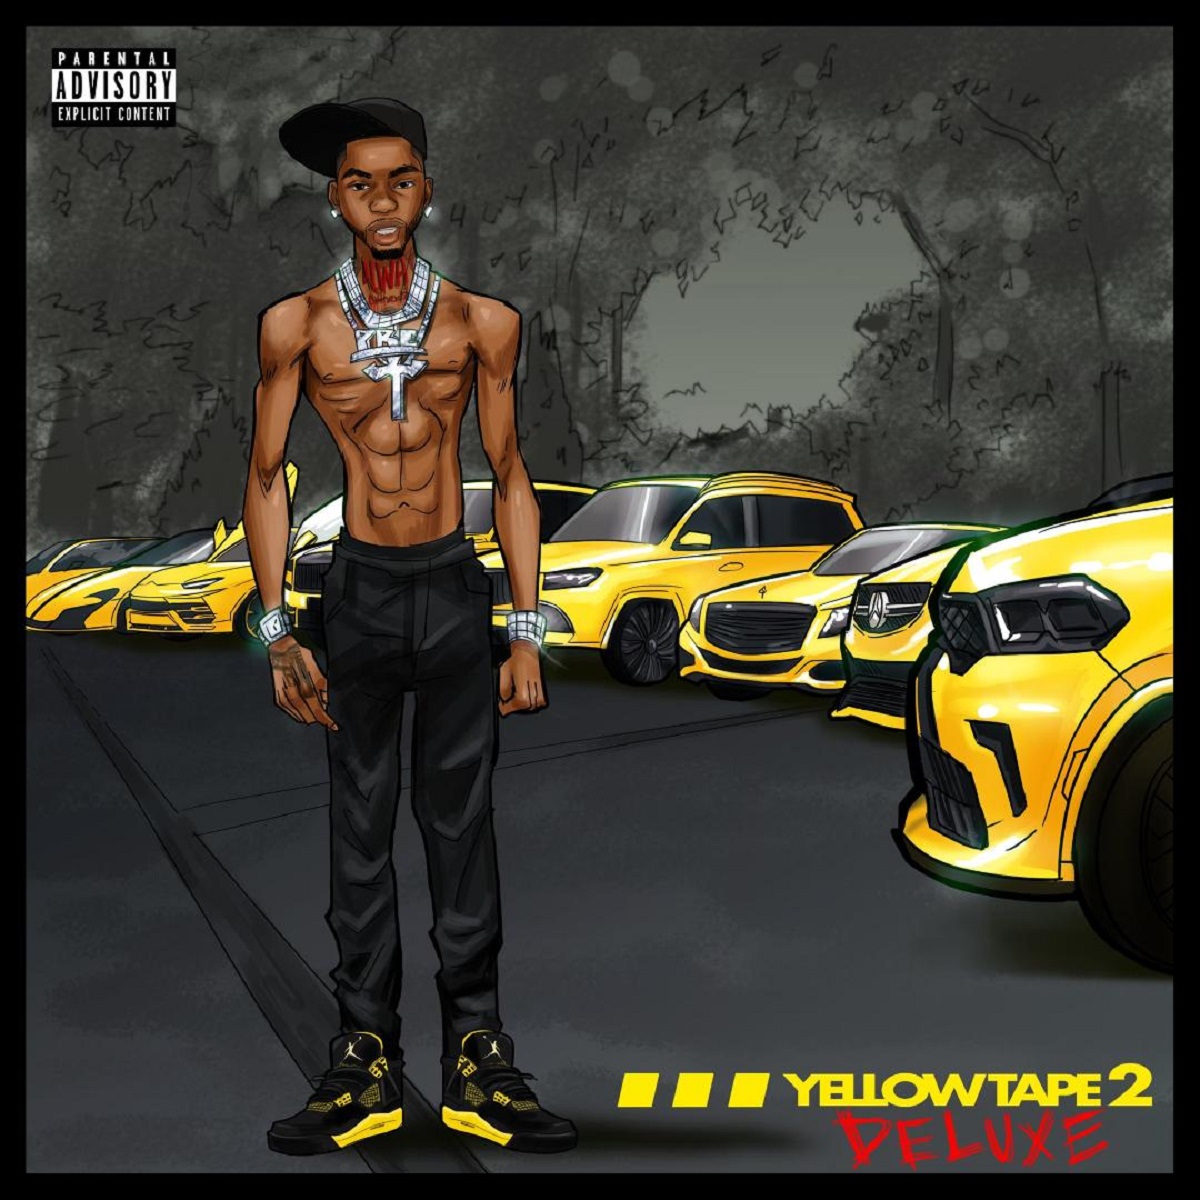 Key Glock returns with deluxe version of Yellow Tape 2